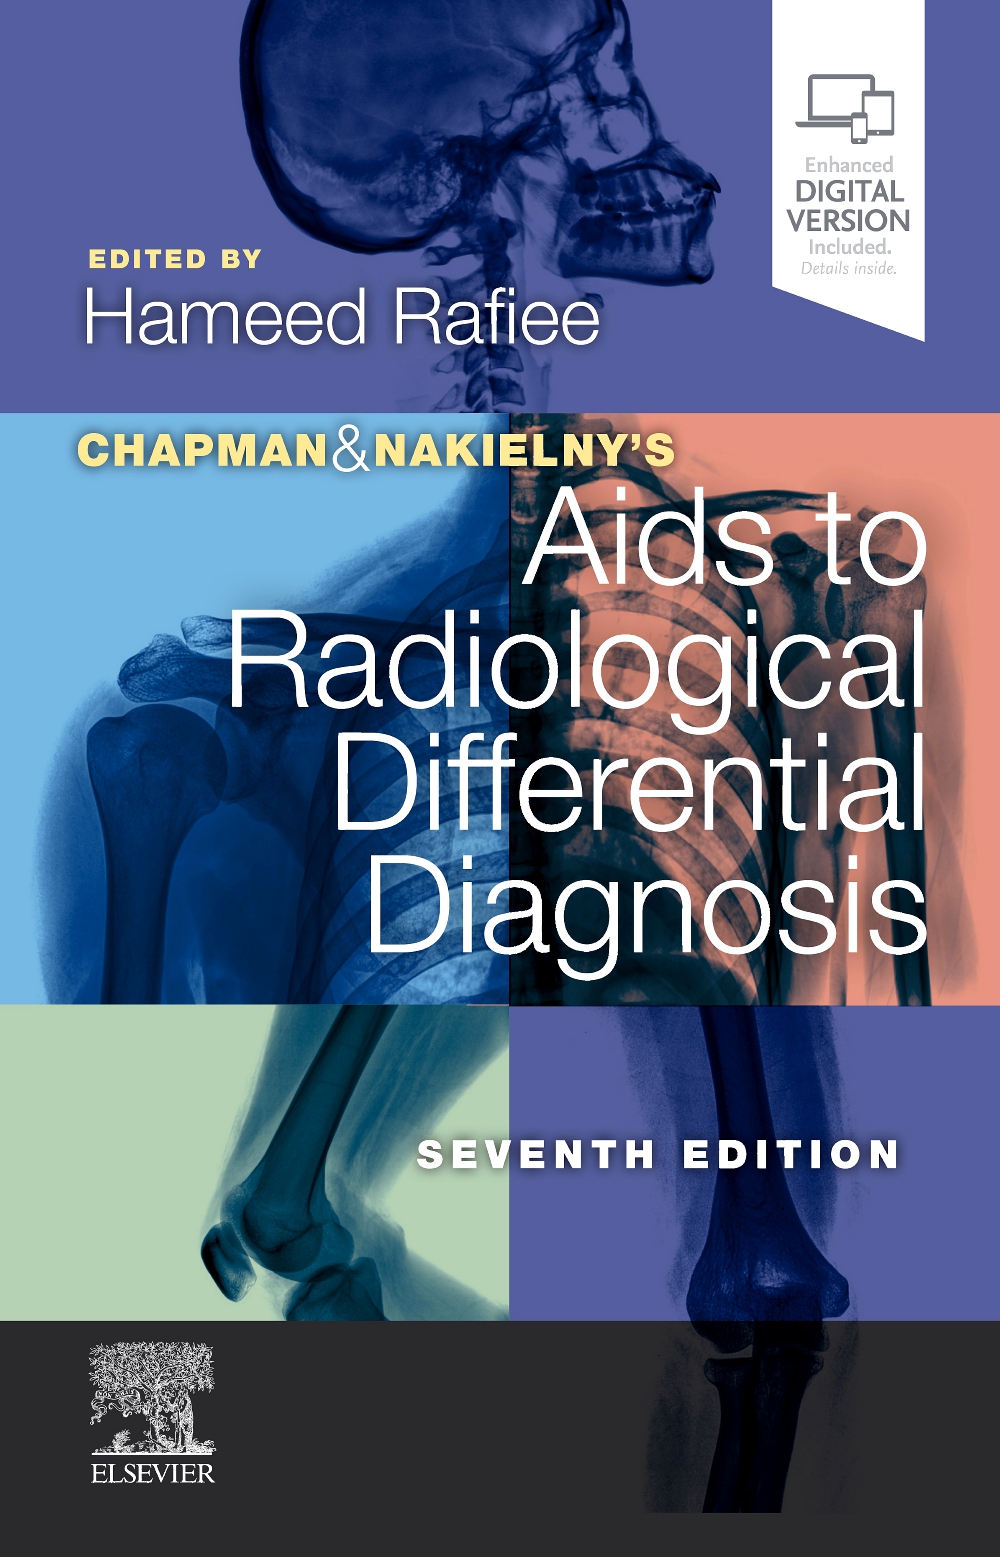 Chapman & Nakielny'S Aids To Radiological Differential Diagnosis